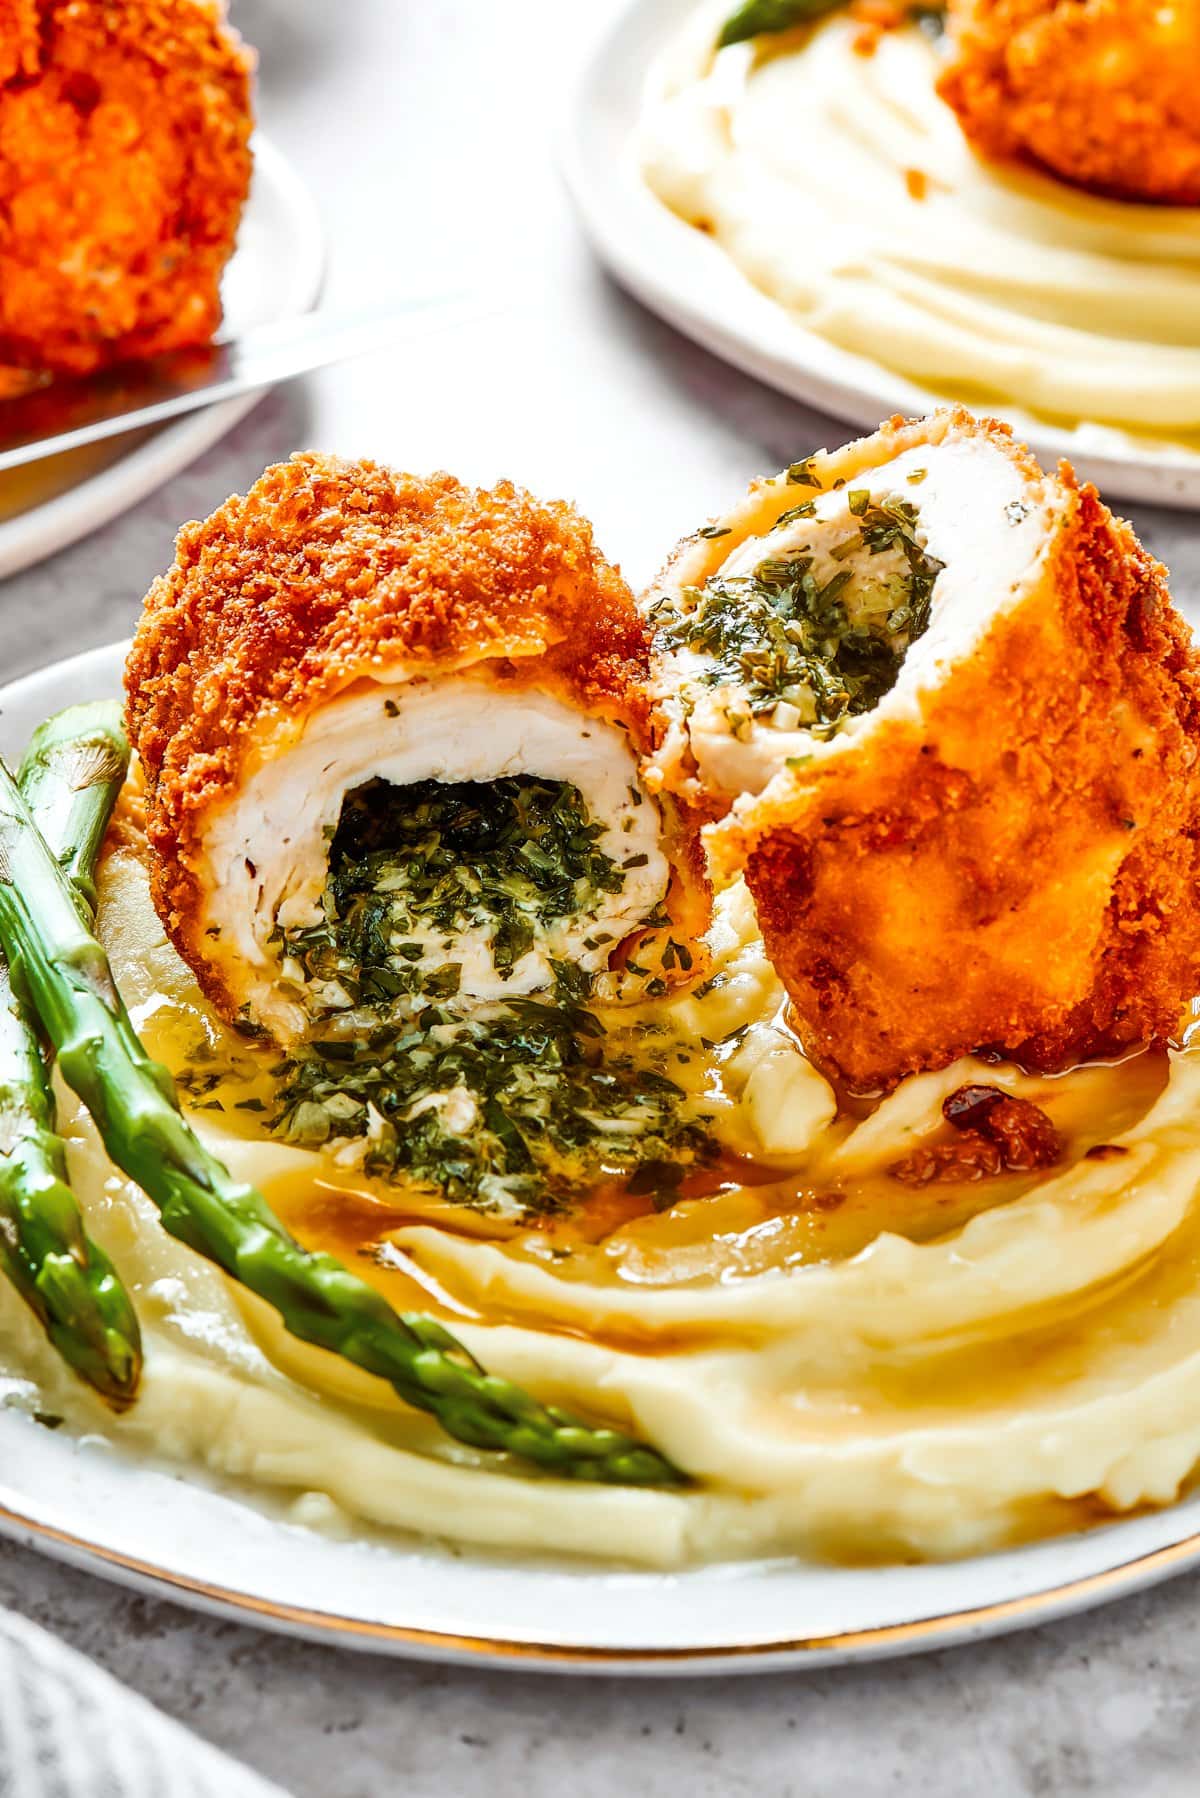 Halved chicken Kiev served over mashed potatoes and a side of asparagus.